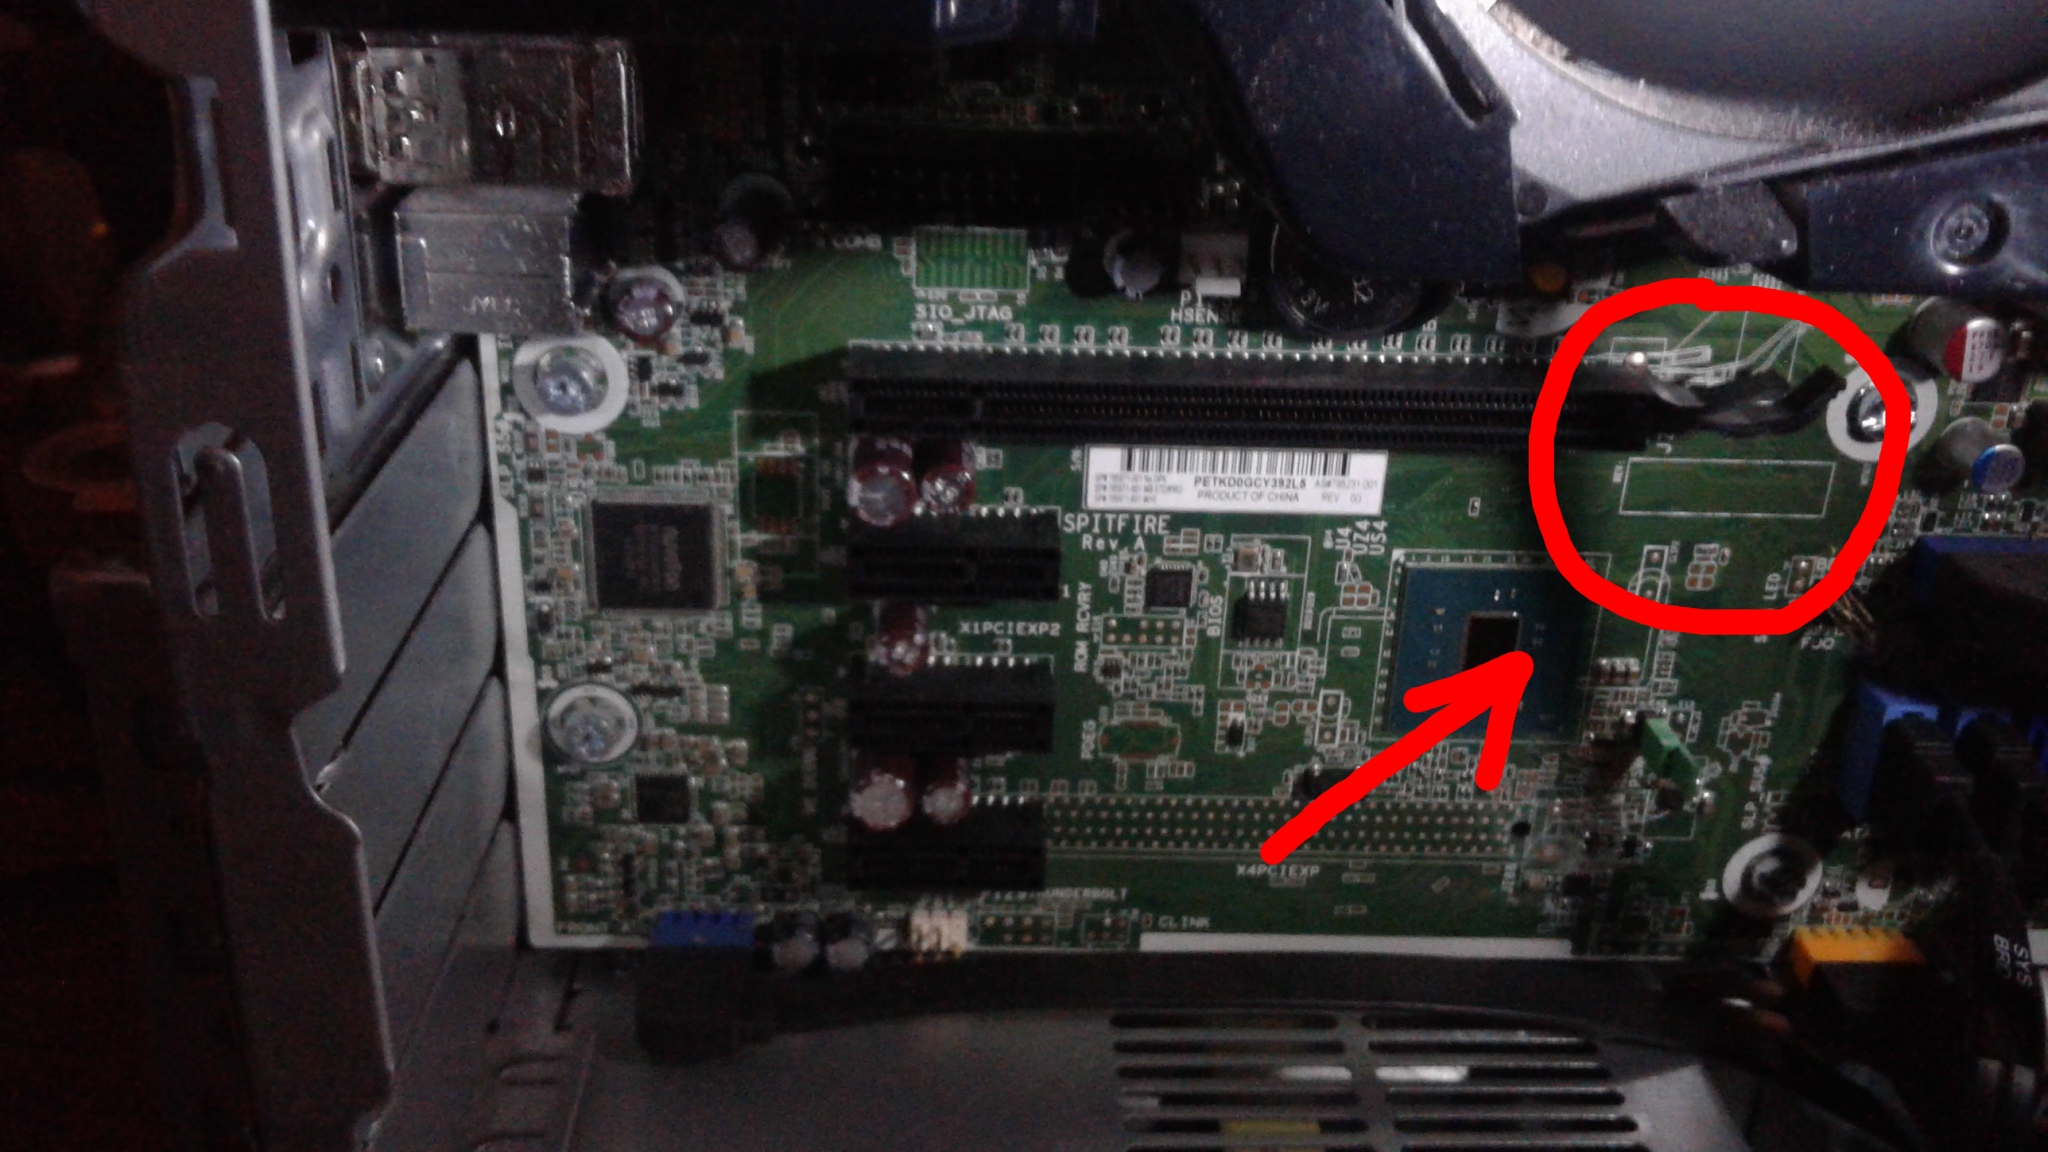 can this HP motherboard handle a graphics card and a new PSU? - CPUs